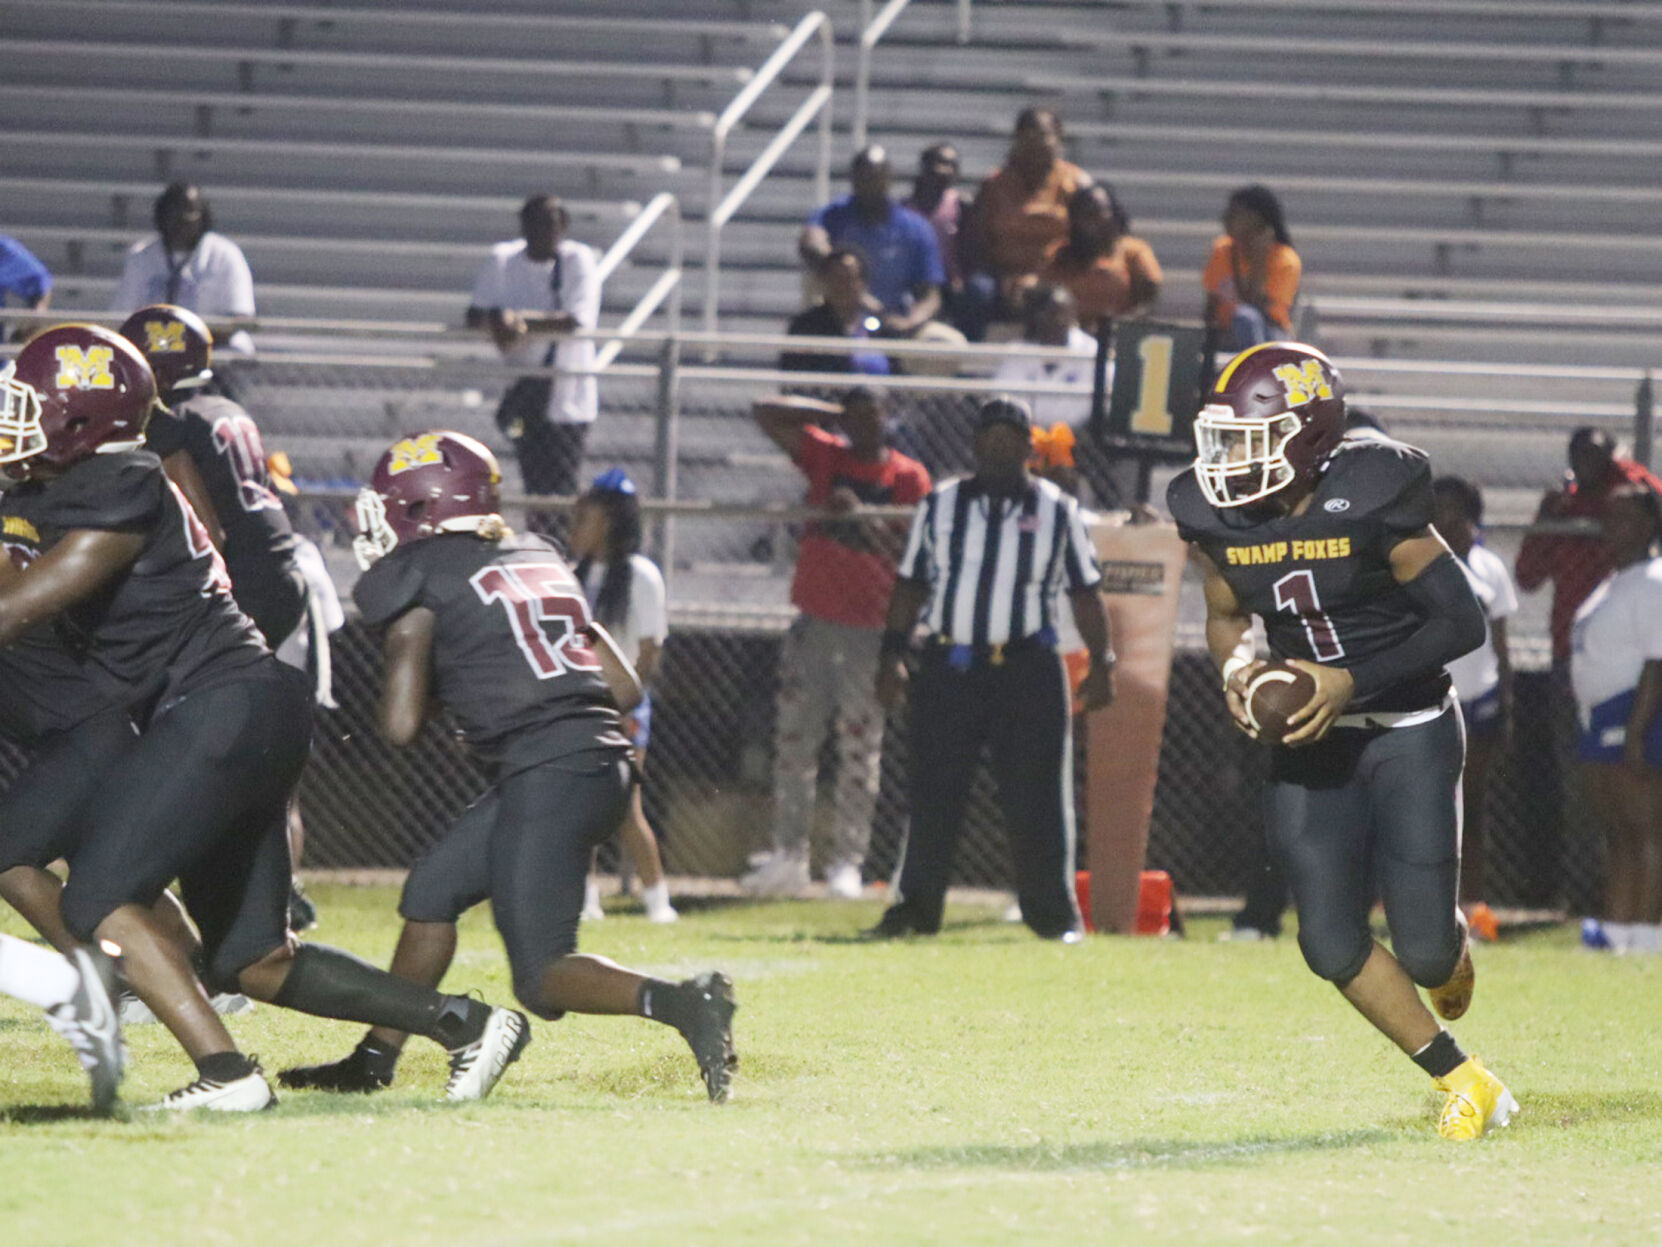 Marion Swamp Foxes Dominate Hemingway in 53-0 Shutout Victory with Cusack’s Stellar Performance